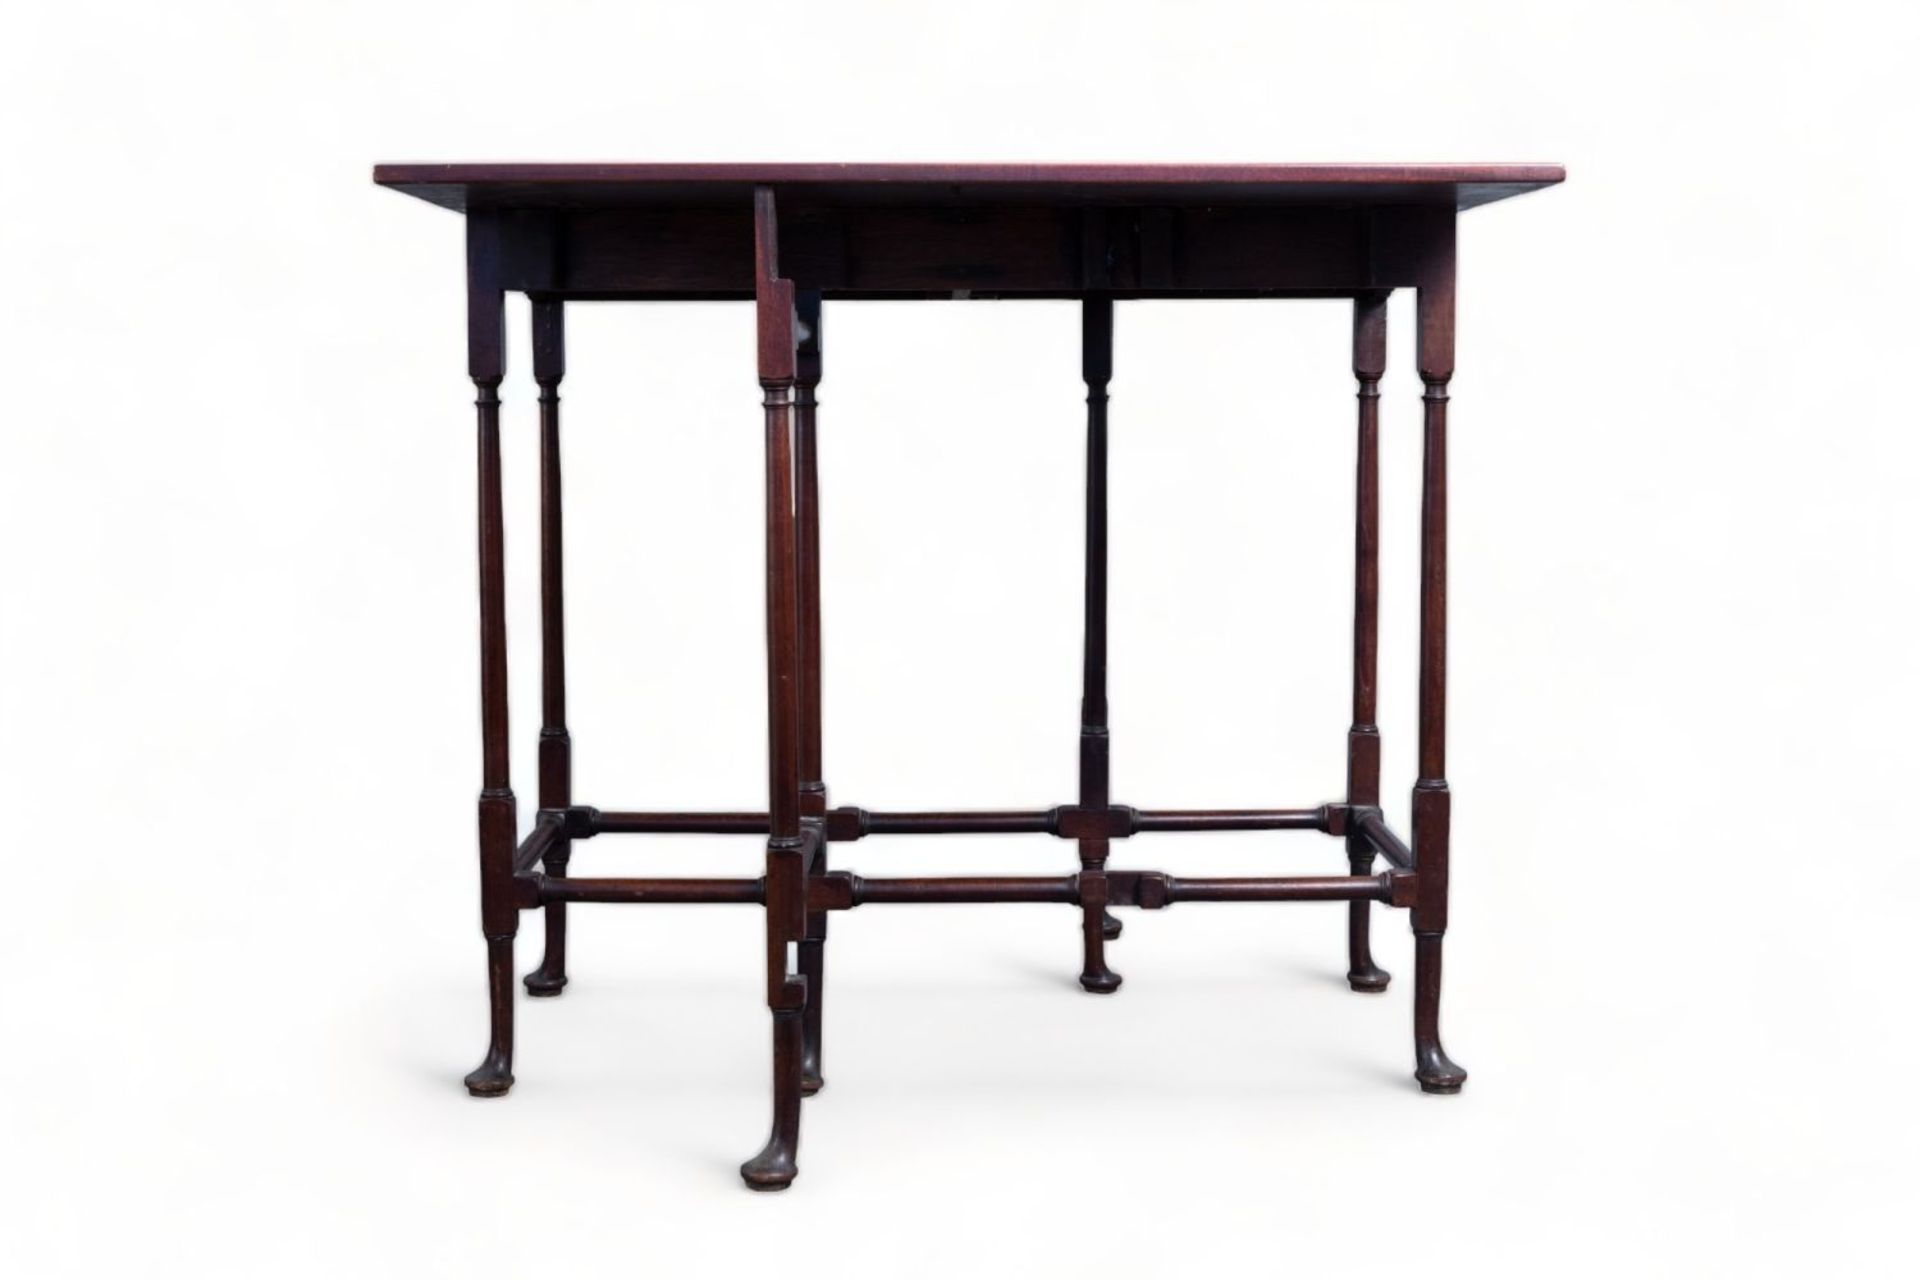 An English George III mahogany spider-leg table by Thomas Chippendale (1718-1779), third quarter of  - Image 5 of 7